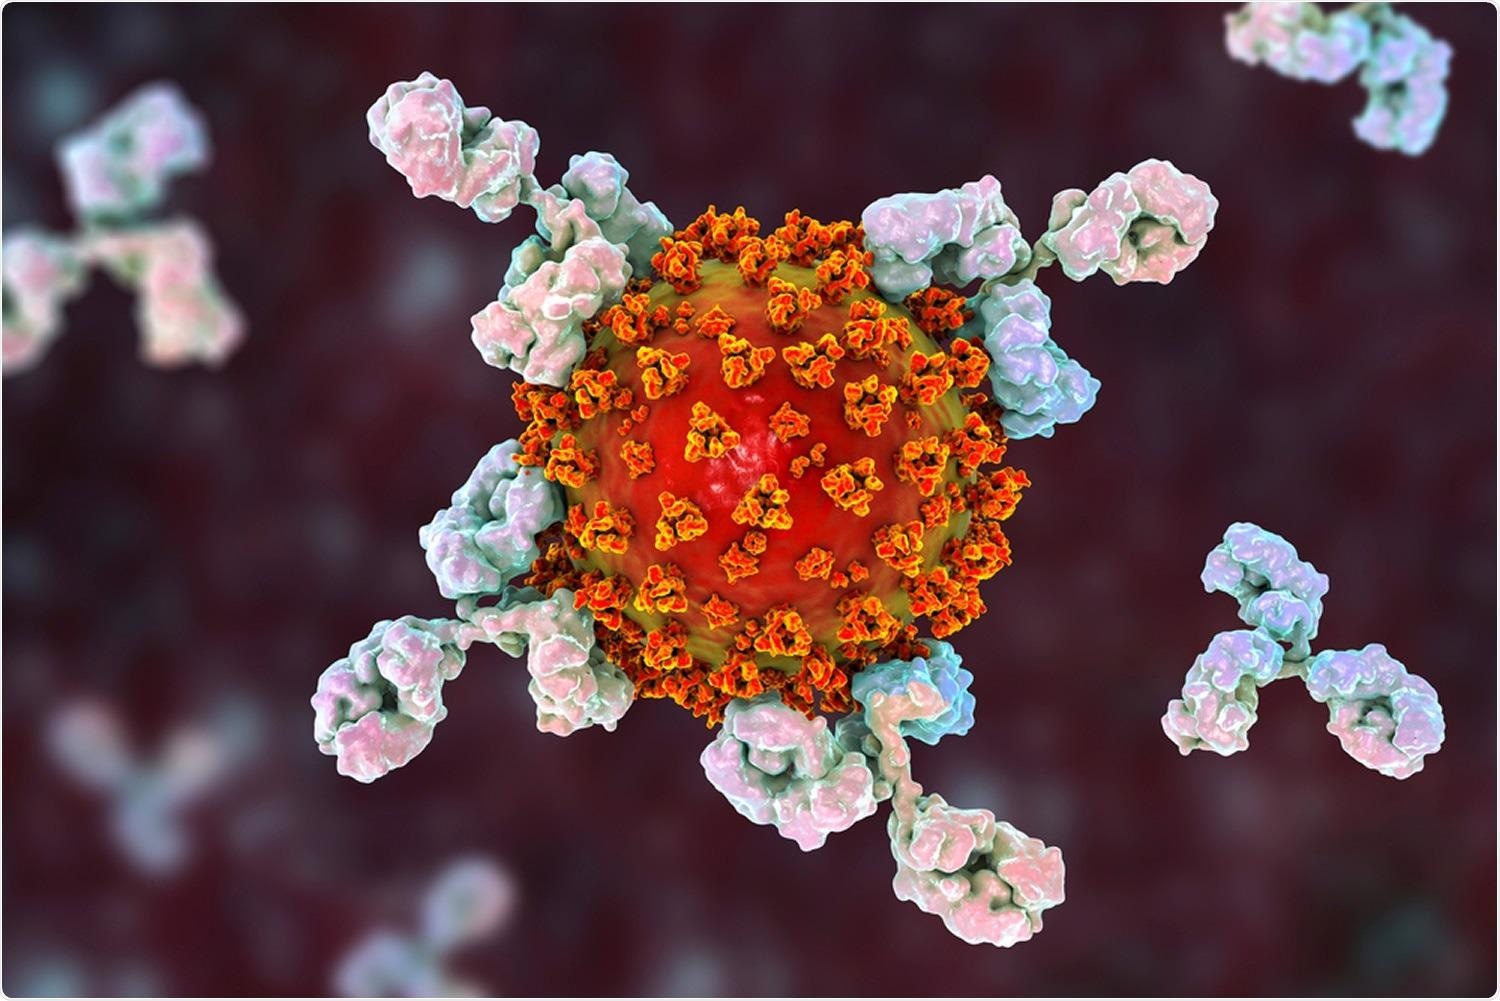 Study: Impact of New Variants on SARS-CoV-2 Infectivity and Neutralization: A Molecular Assessment of the Alterations in the Spike-Host Protein Interactions. Image Credit: Kateryna Kon / Shutterstock